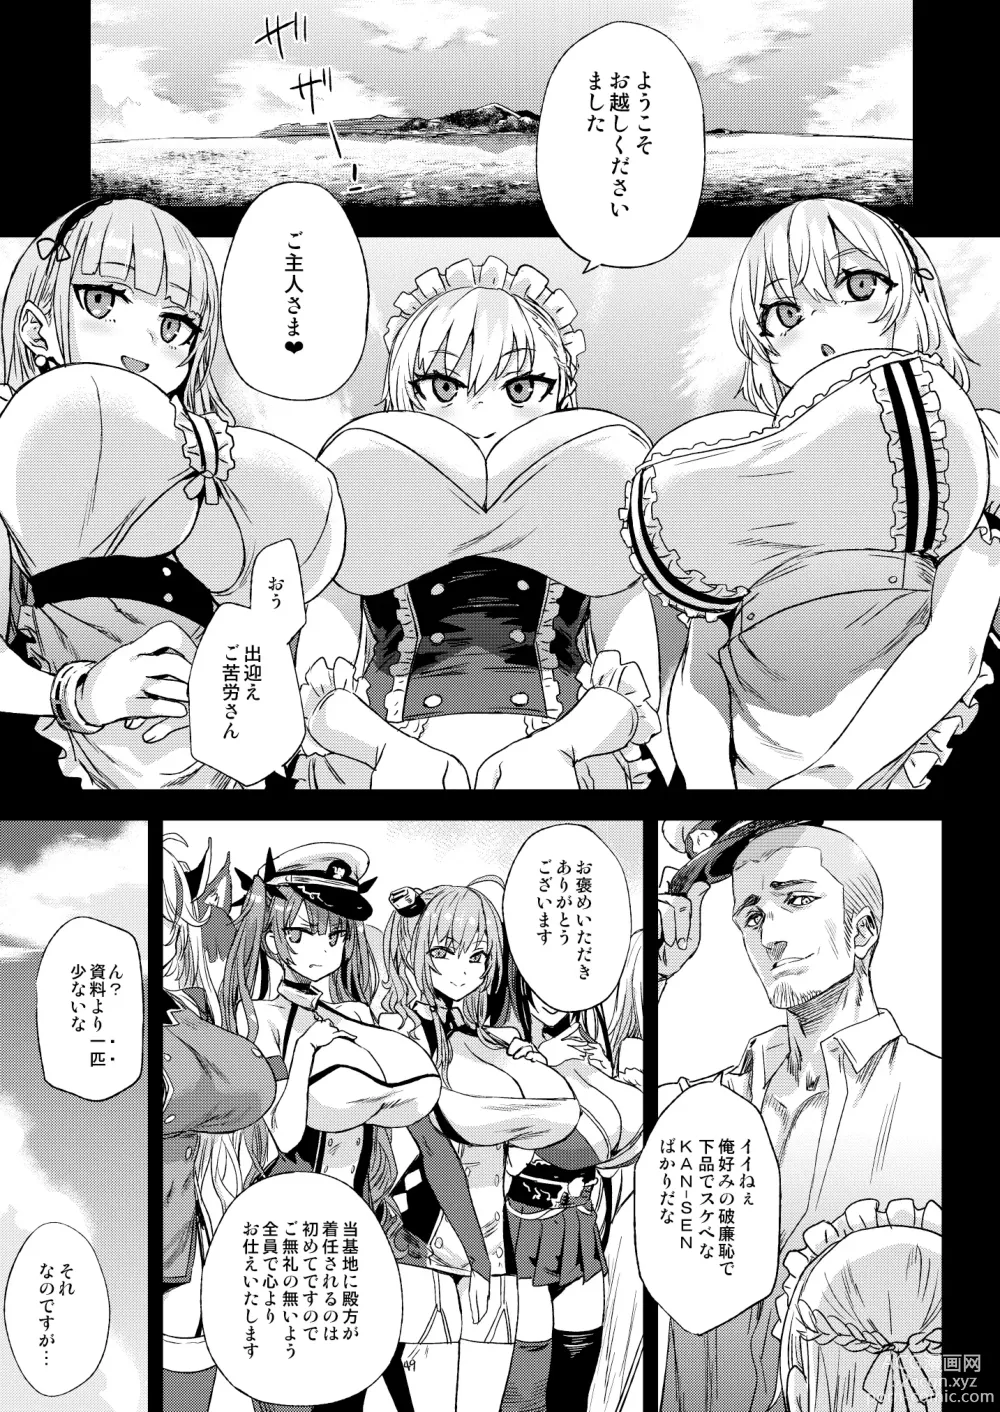 Page 3 of doujinshi Lady falls into a maid